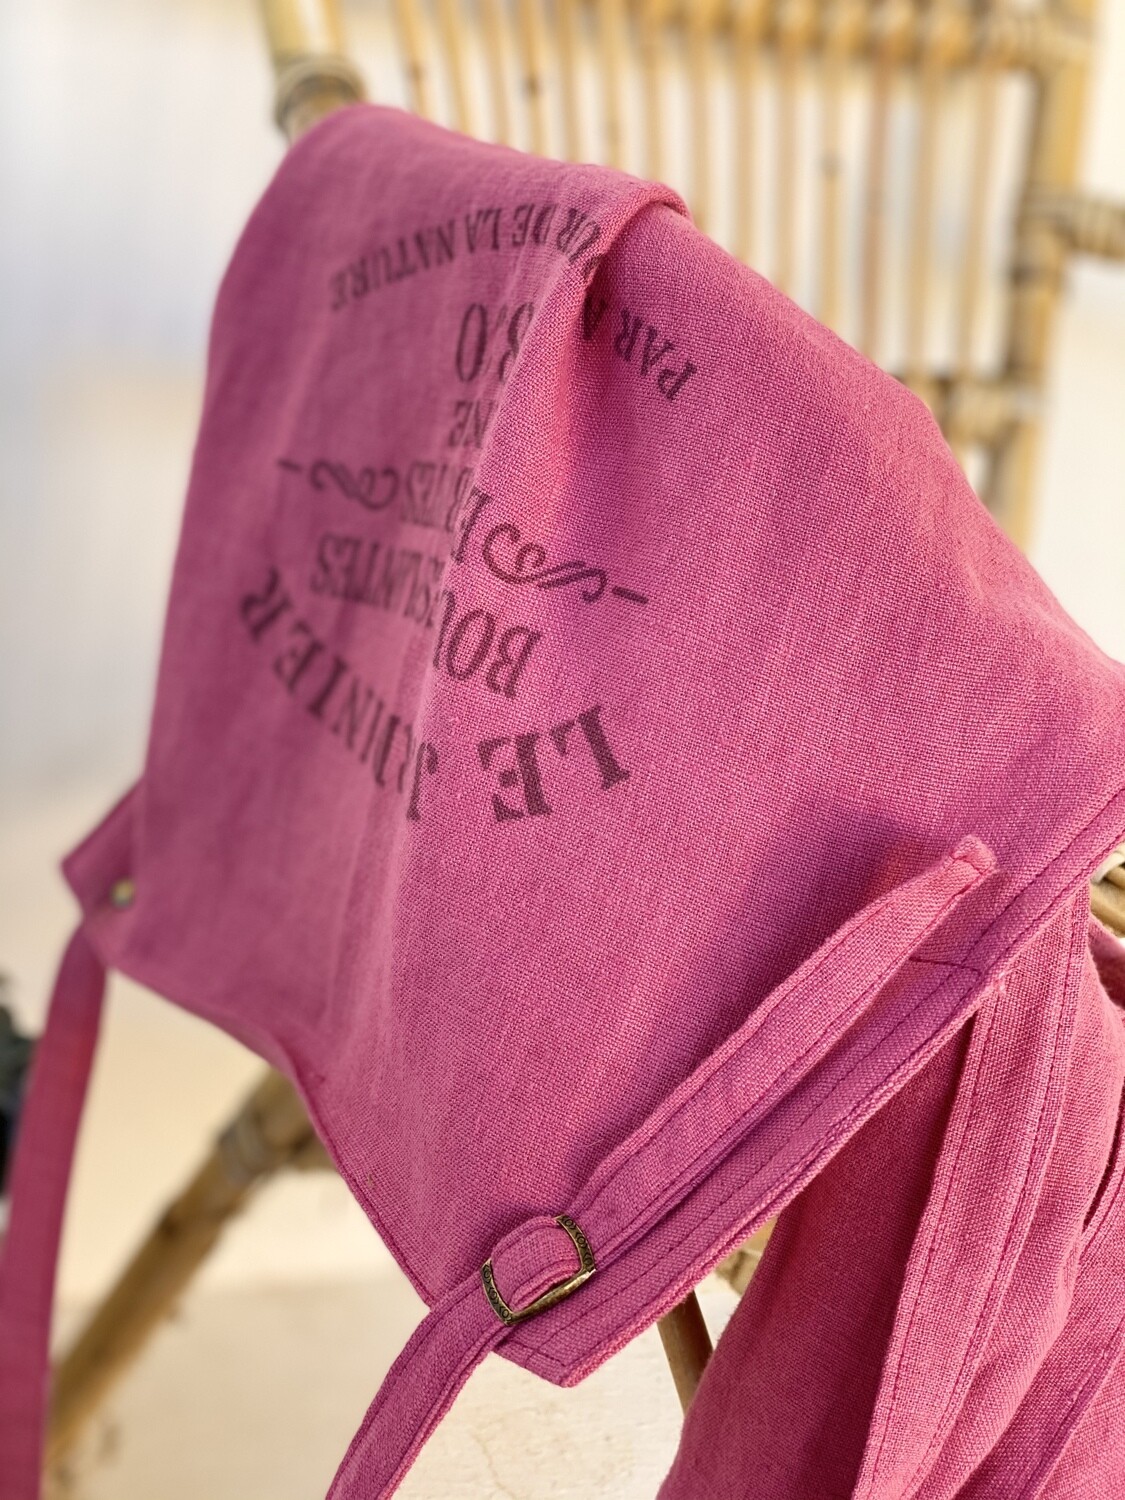 Atelier Costa Pink linen aprons made in Spain